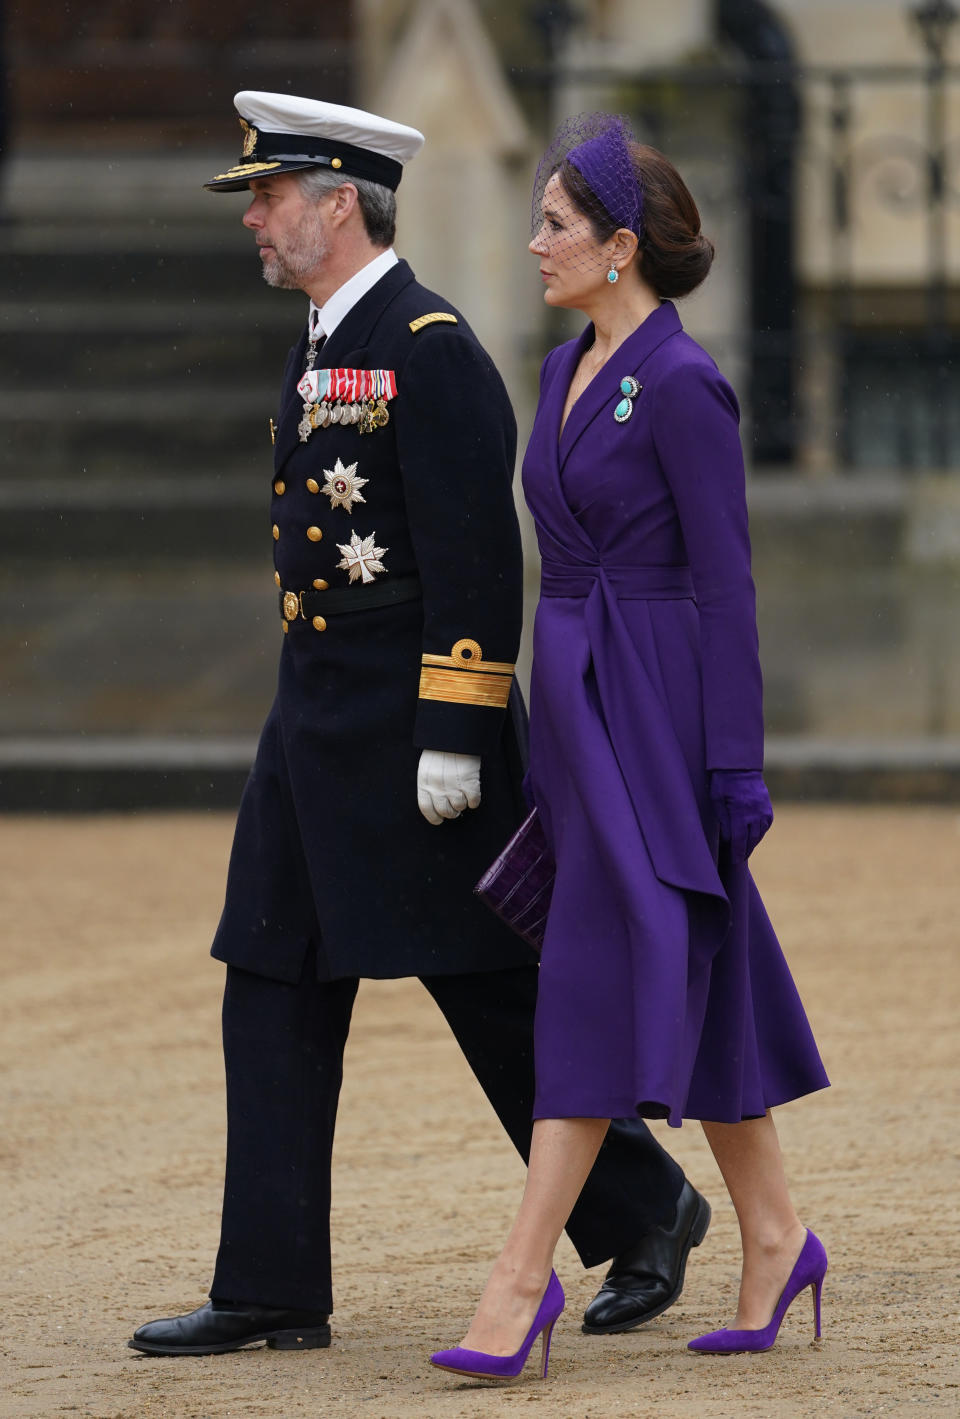 <p>Danish royals, Crown Prince Frederik of Denmark and Crown Princess Mary of Denmark look regal as they arrive at Westminster Abbey. (Getty Images)</p> 